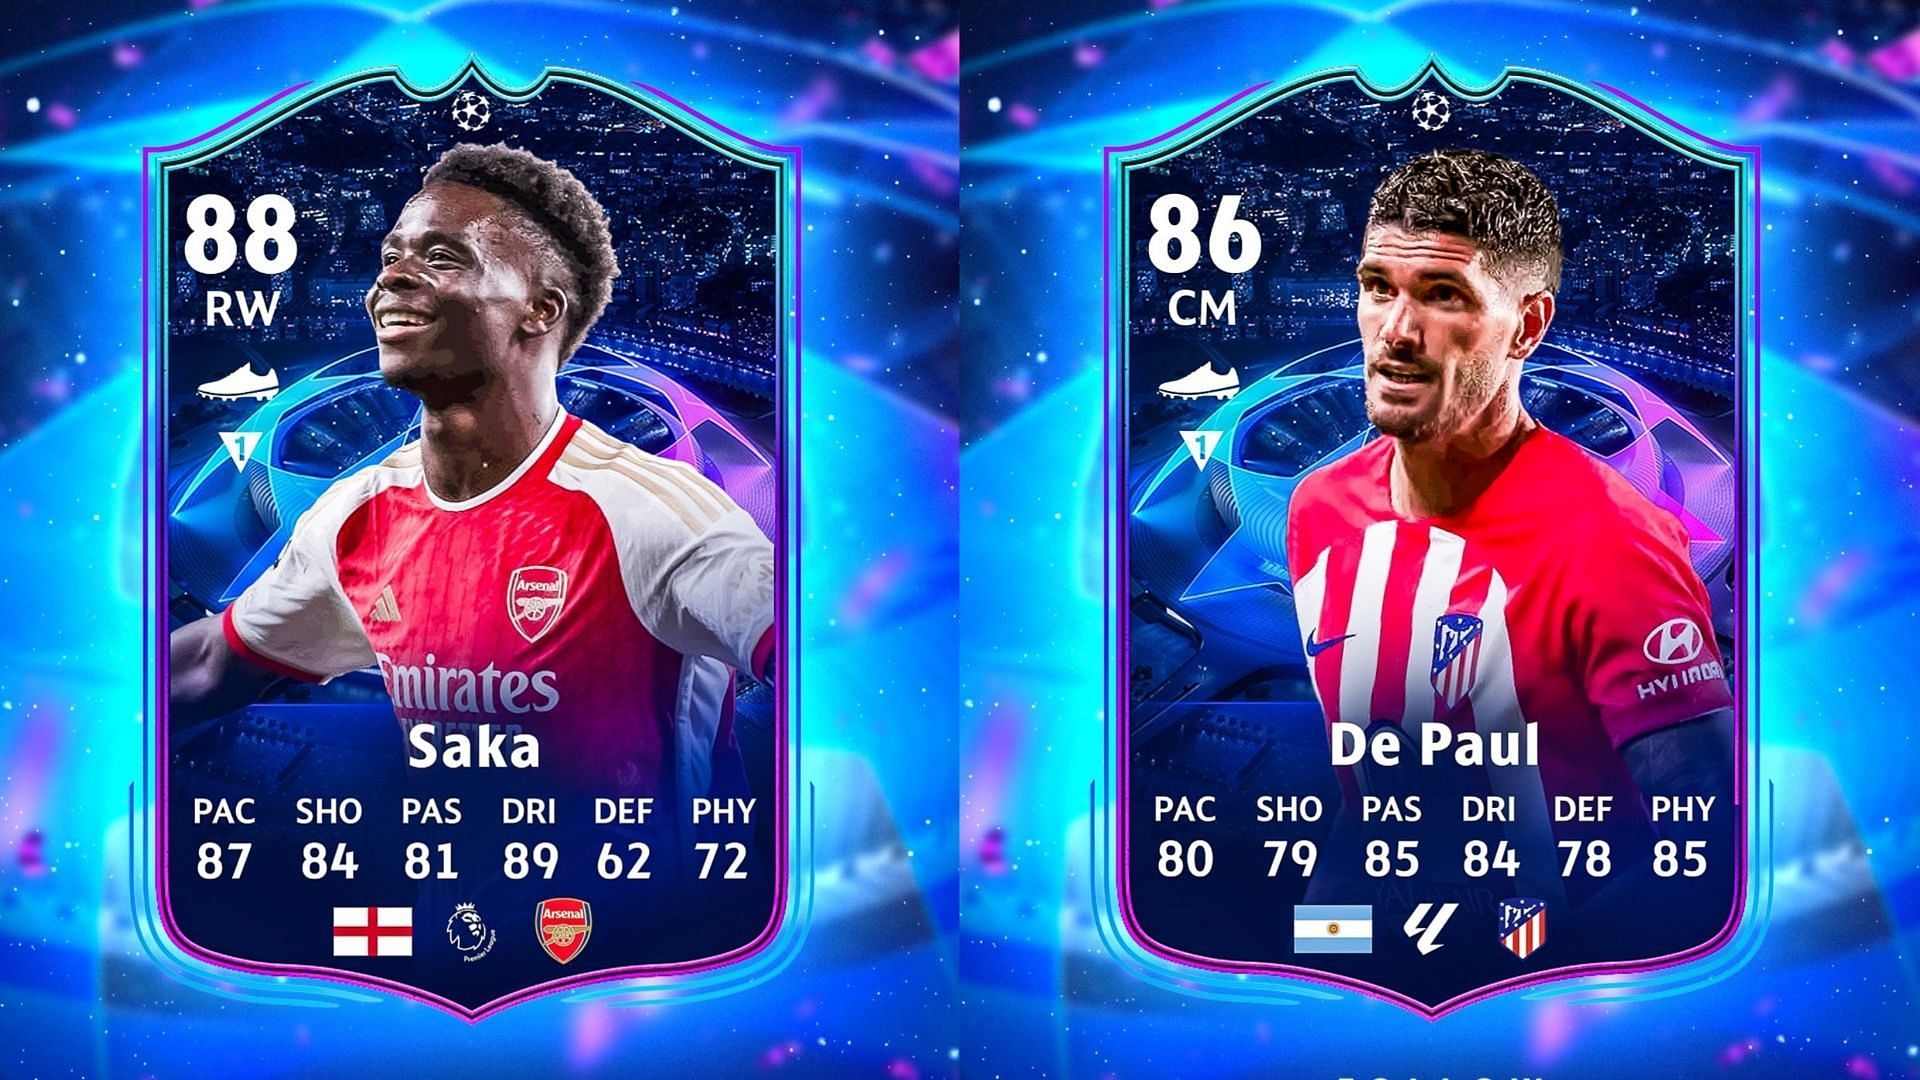 Two new cards have been leaked on social media (Images via Twitter/FUT Sheriff)